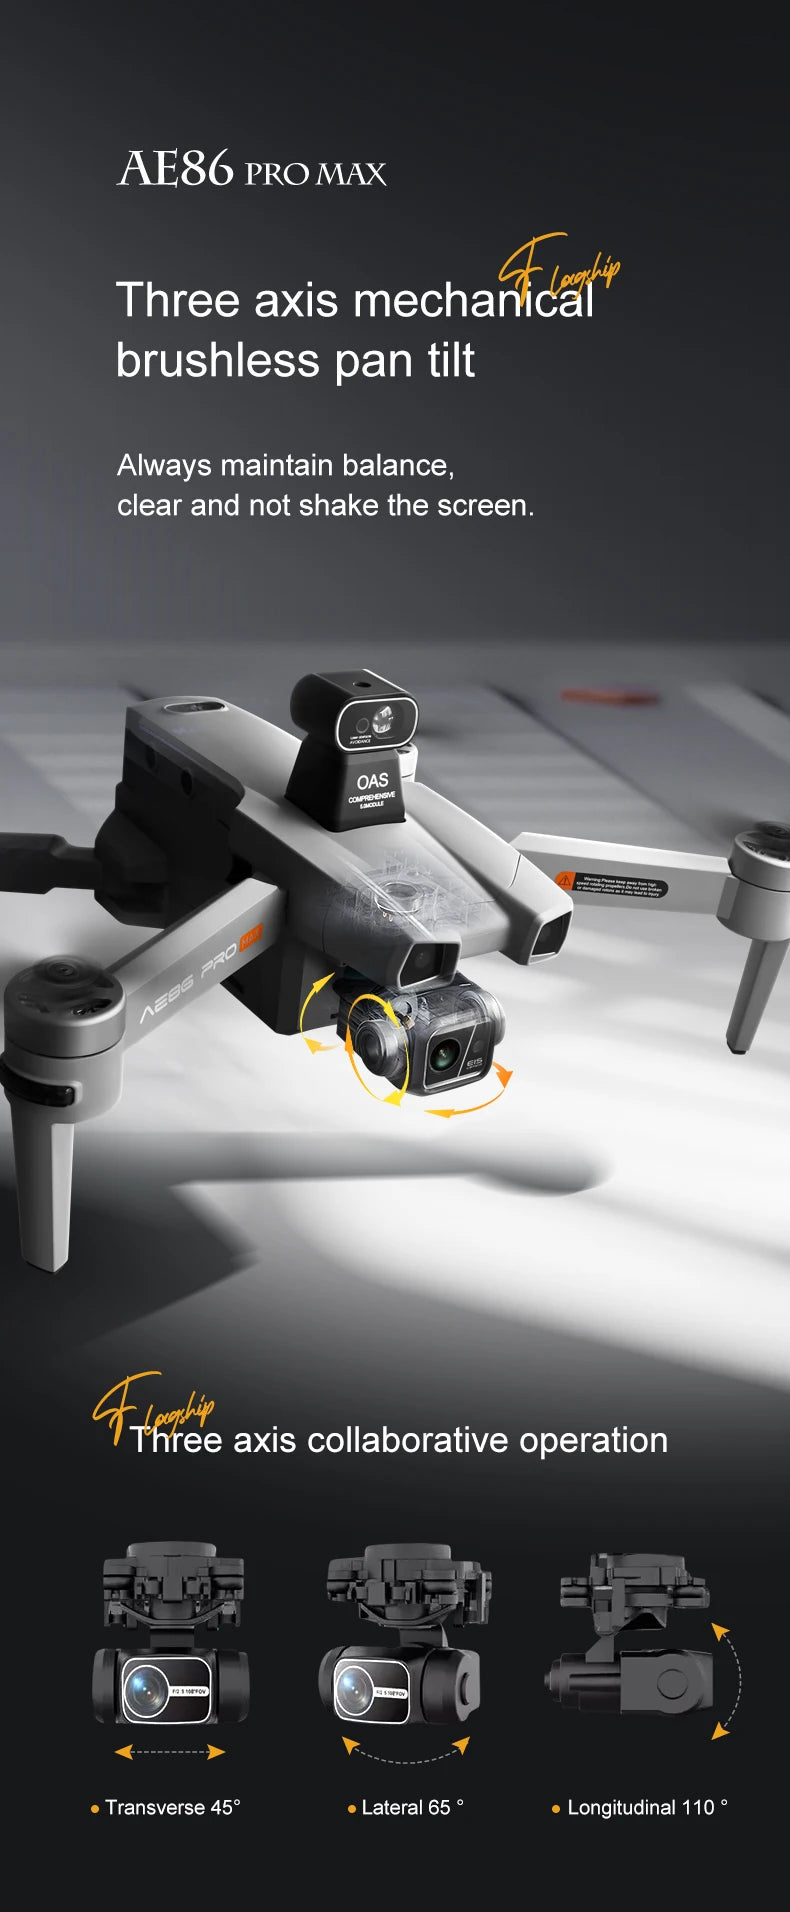 AE86 Pro Max Drone, AE86 PRO MAX Three axis brushless pan tilt Always maintain balance, clear